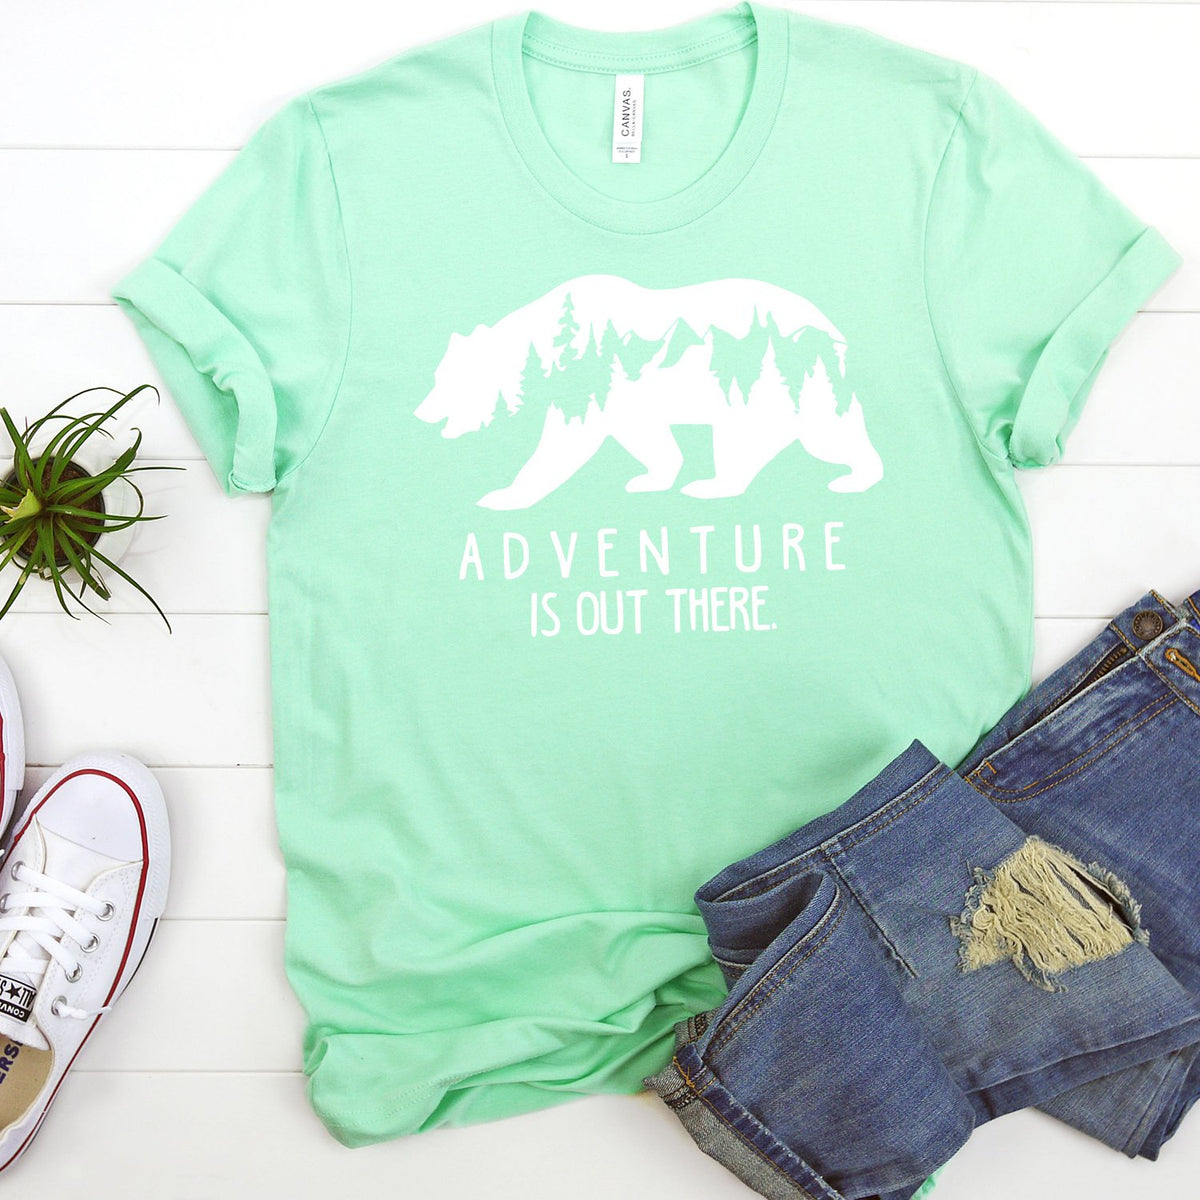 Adventure is Out There - Short Sleeve Tee Shirt